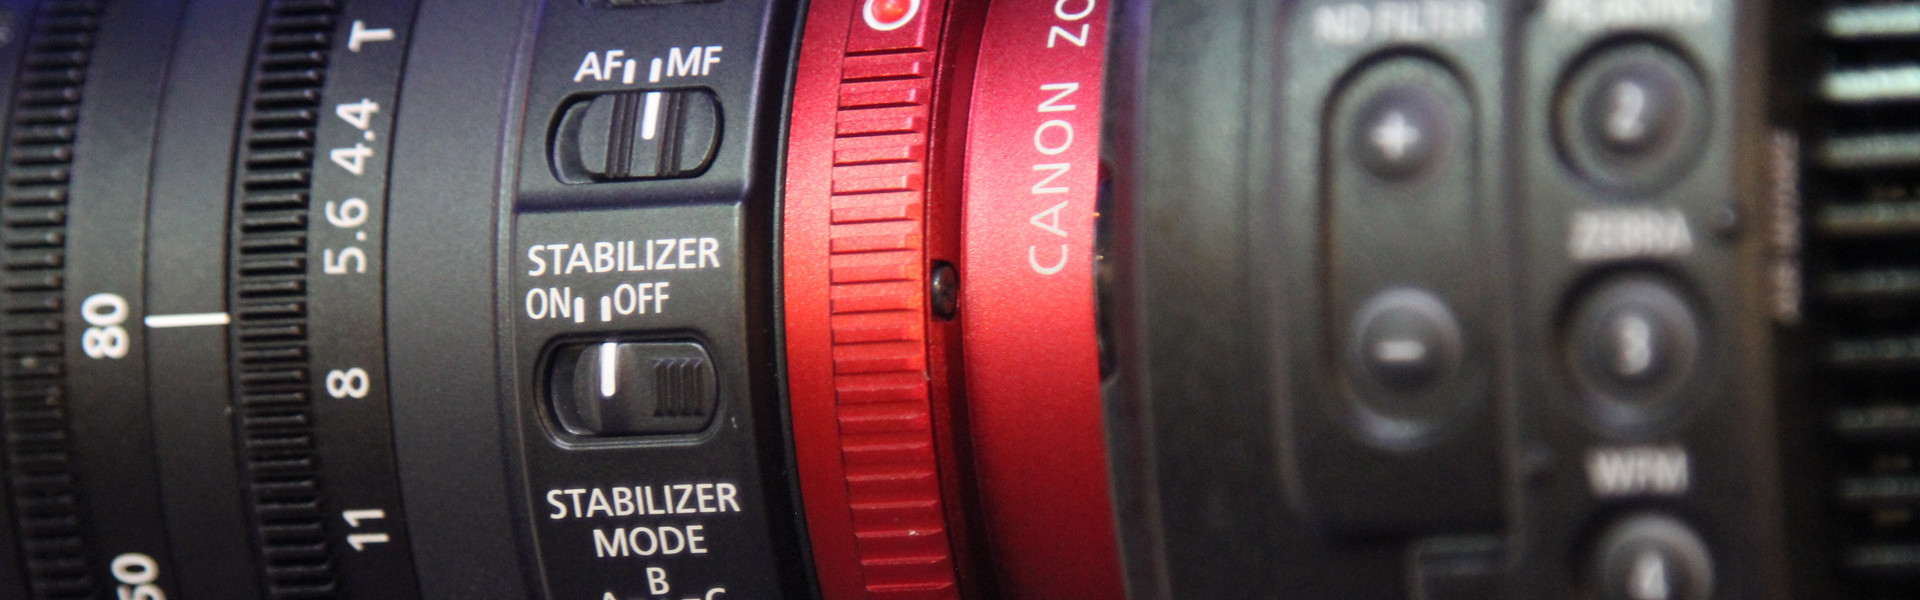 Header image for article C300 Quick Tip: Updating Firmware